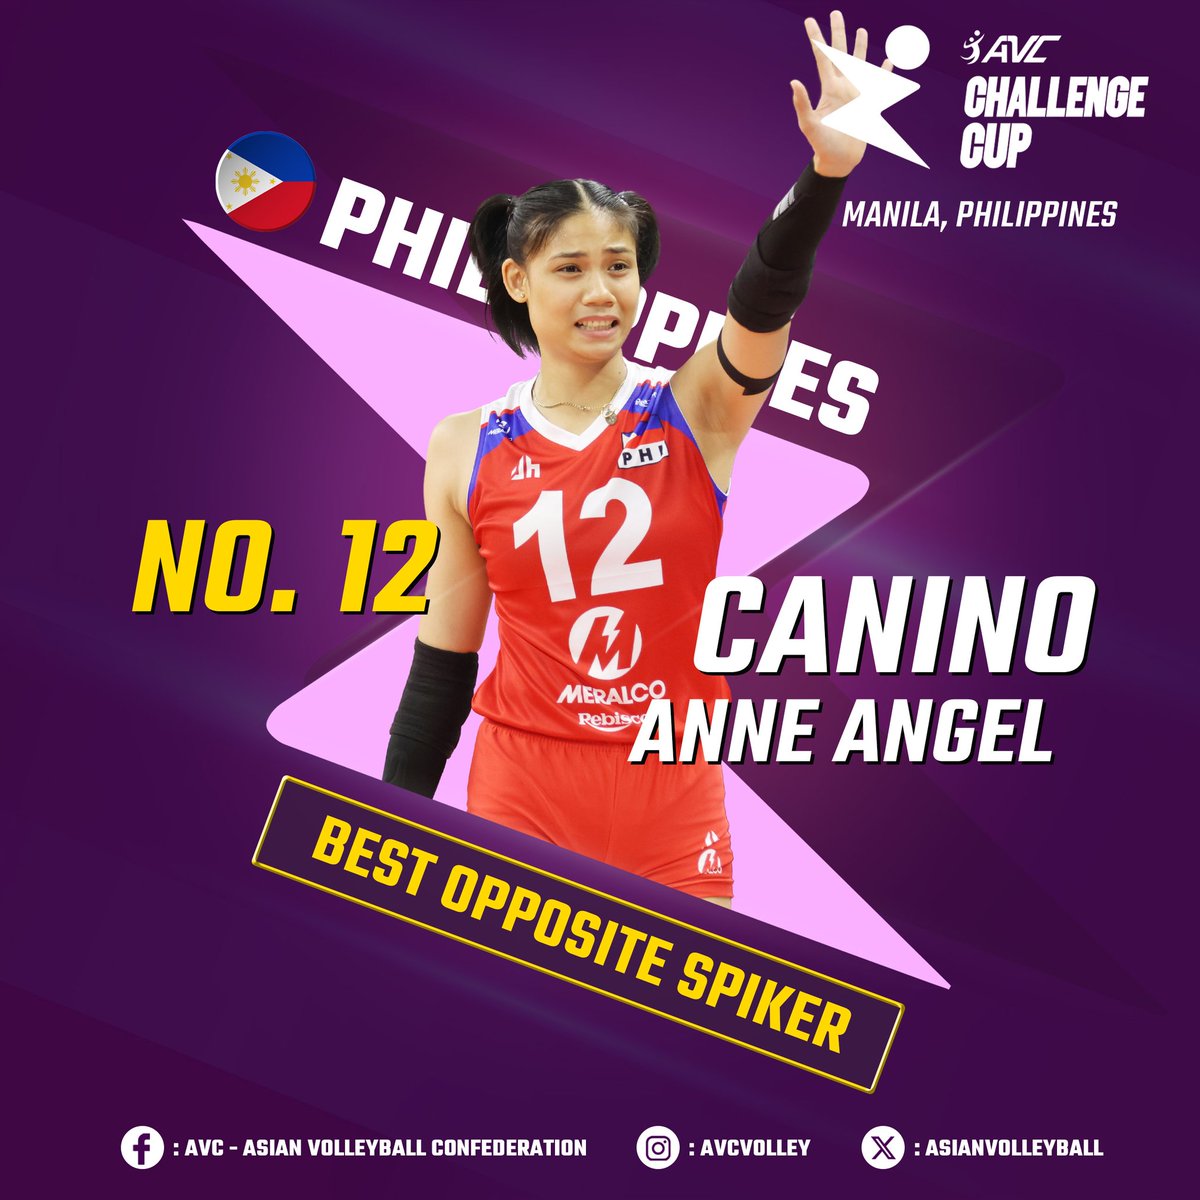 Congratulations to Jia De Guzman and Angel Canino for winning the Best Setter and Best Opposite Spiker Awards!

#AVCChallengeCup #AVCVolley #AVC #AsianVolleyball #ChallengeCup #AVCChallengeCup2024 

📷 AVC